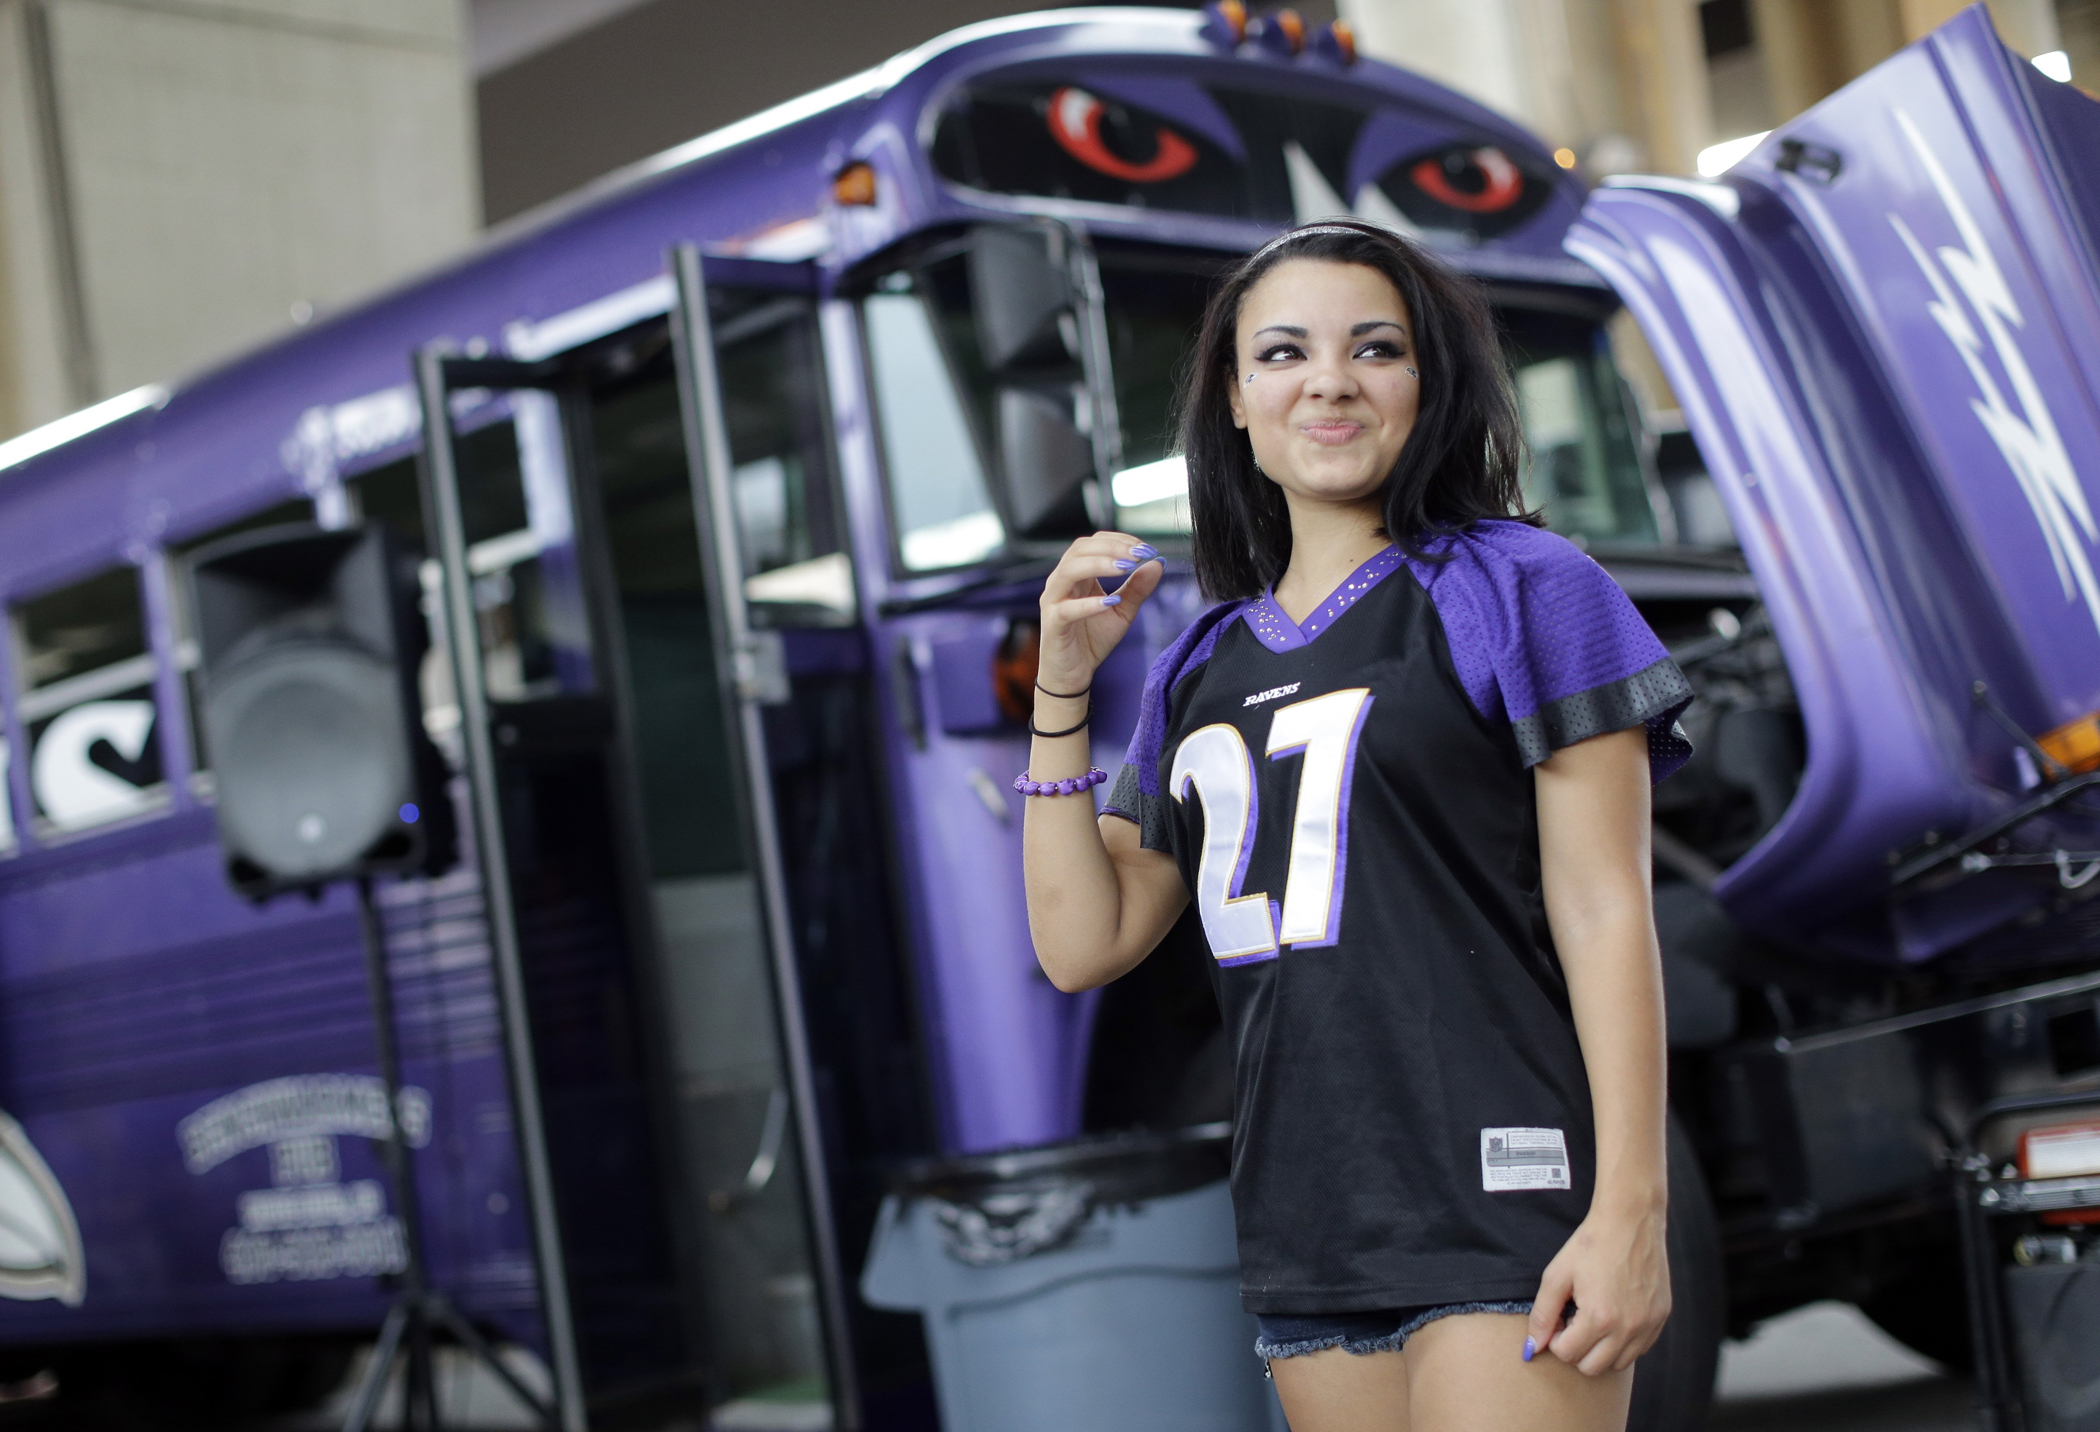 Racquel Bailey wears a Ray Rice jersey as she tailgates before the Baltimore Ravens' NFL football game against the Pittsburgh Steelers on Sept. 11, 2014, in Baltimore. (Patrick Semansky—AP)